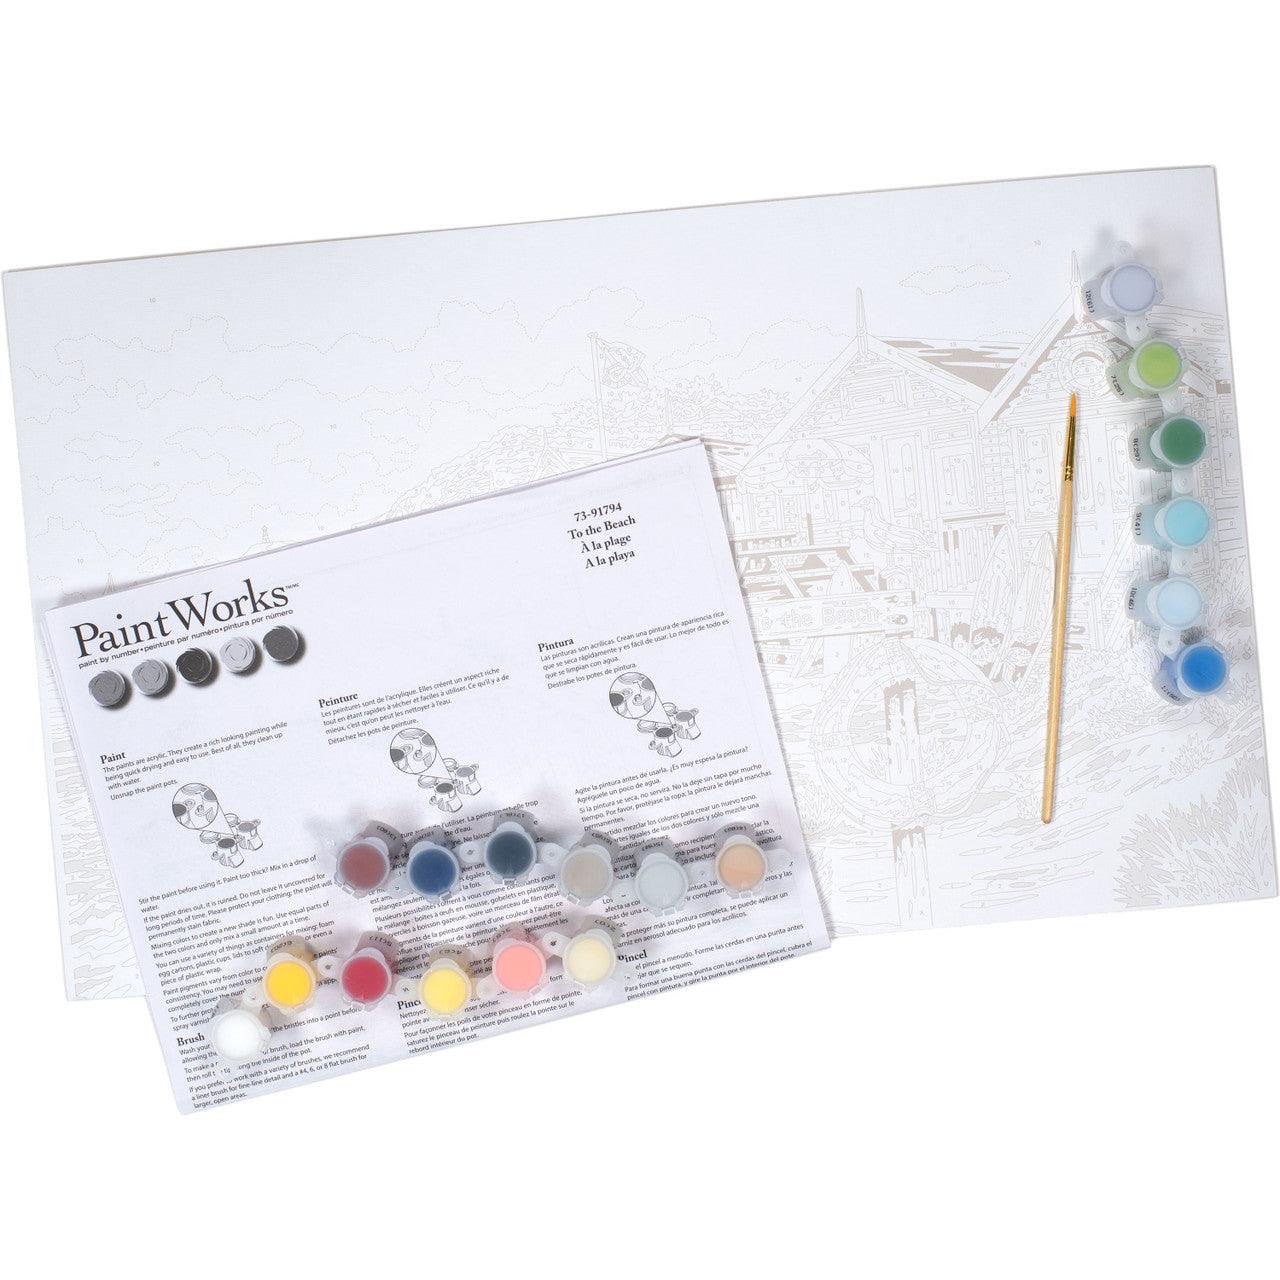 TO THE BEACH, Paint by Number Kit, DIMENSIONS PAINTWORKS (73-91794) - Leo Hobby